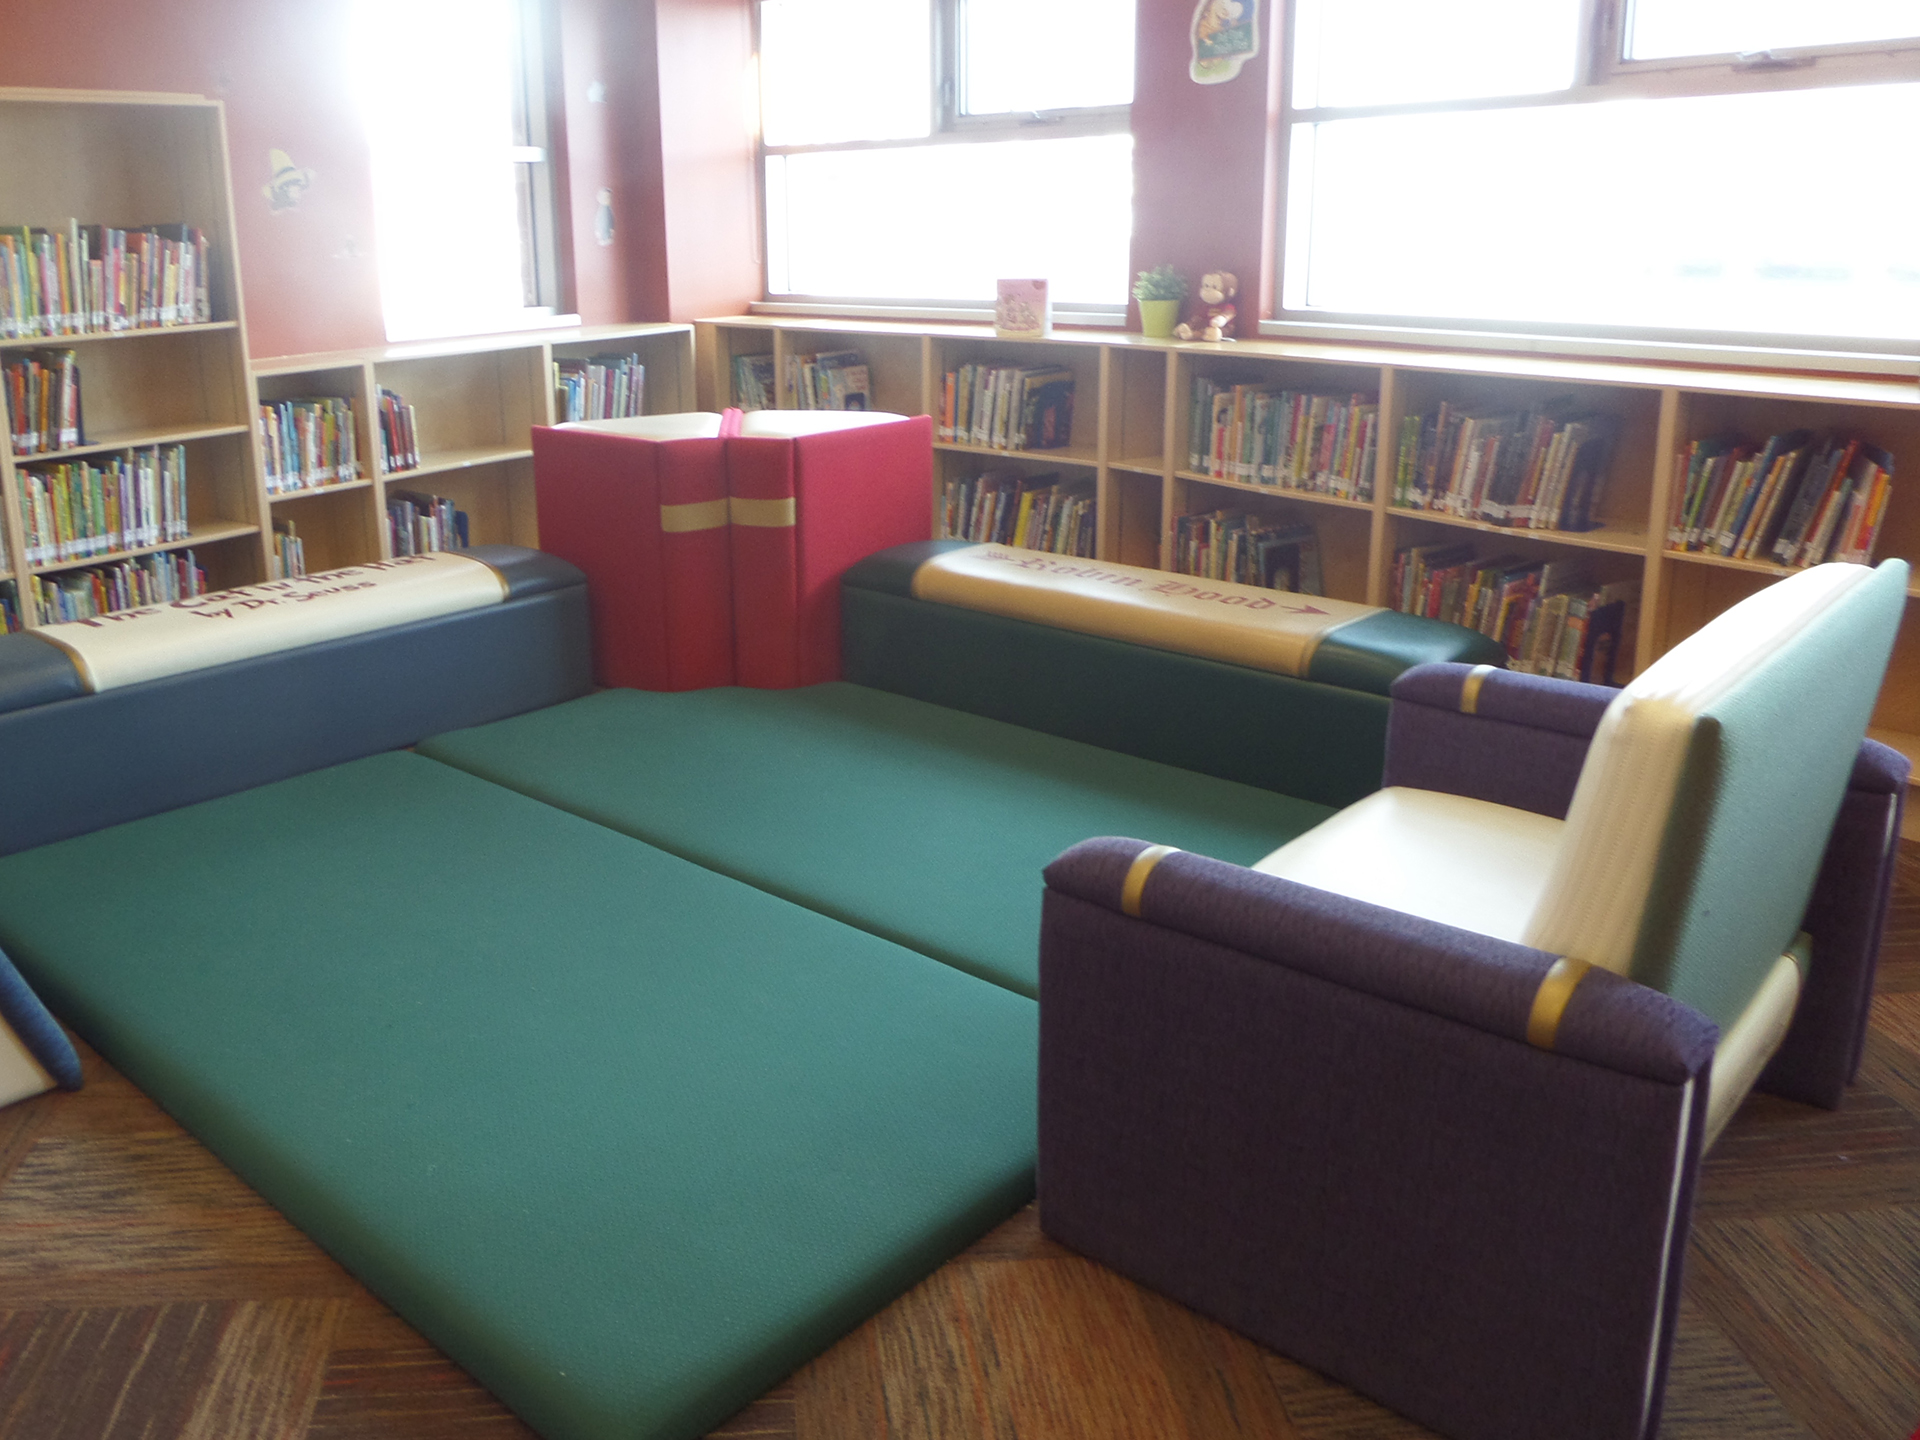 Children’s Library soft seating